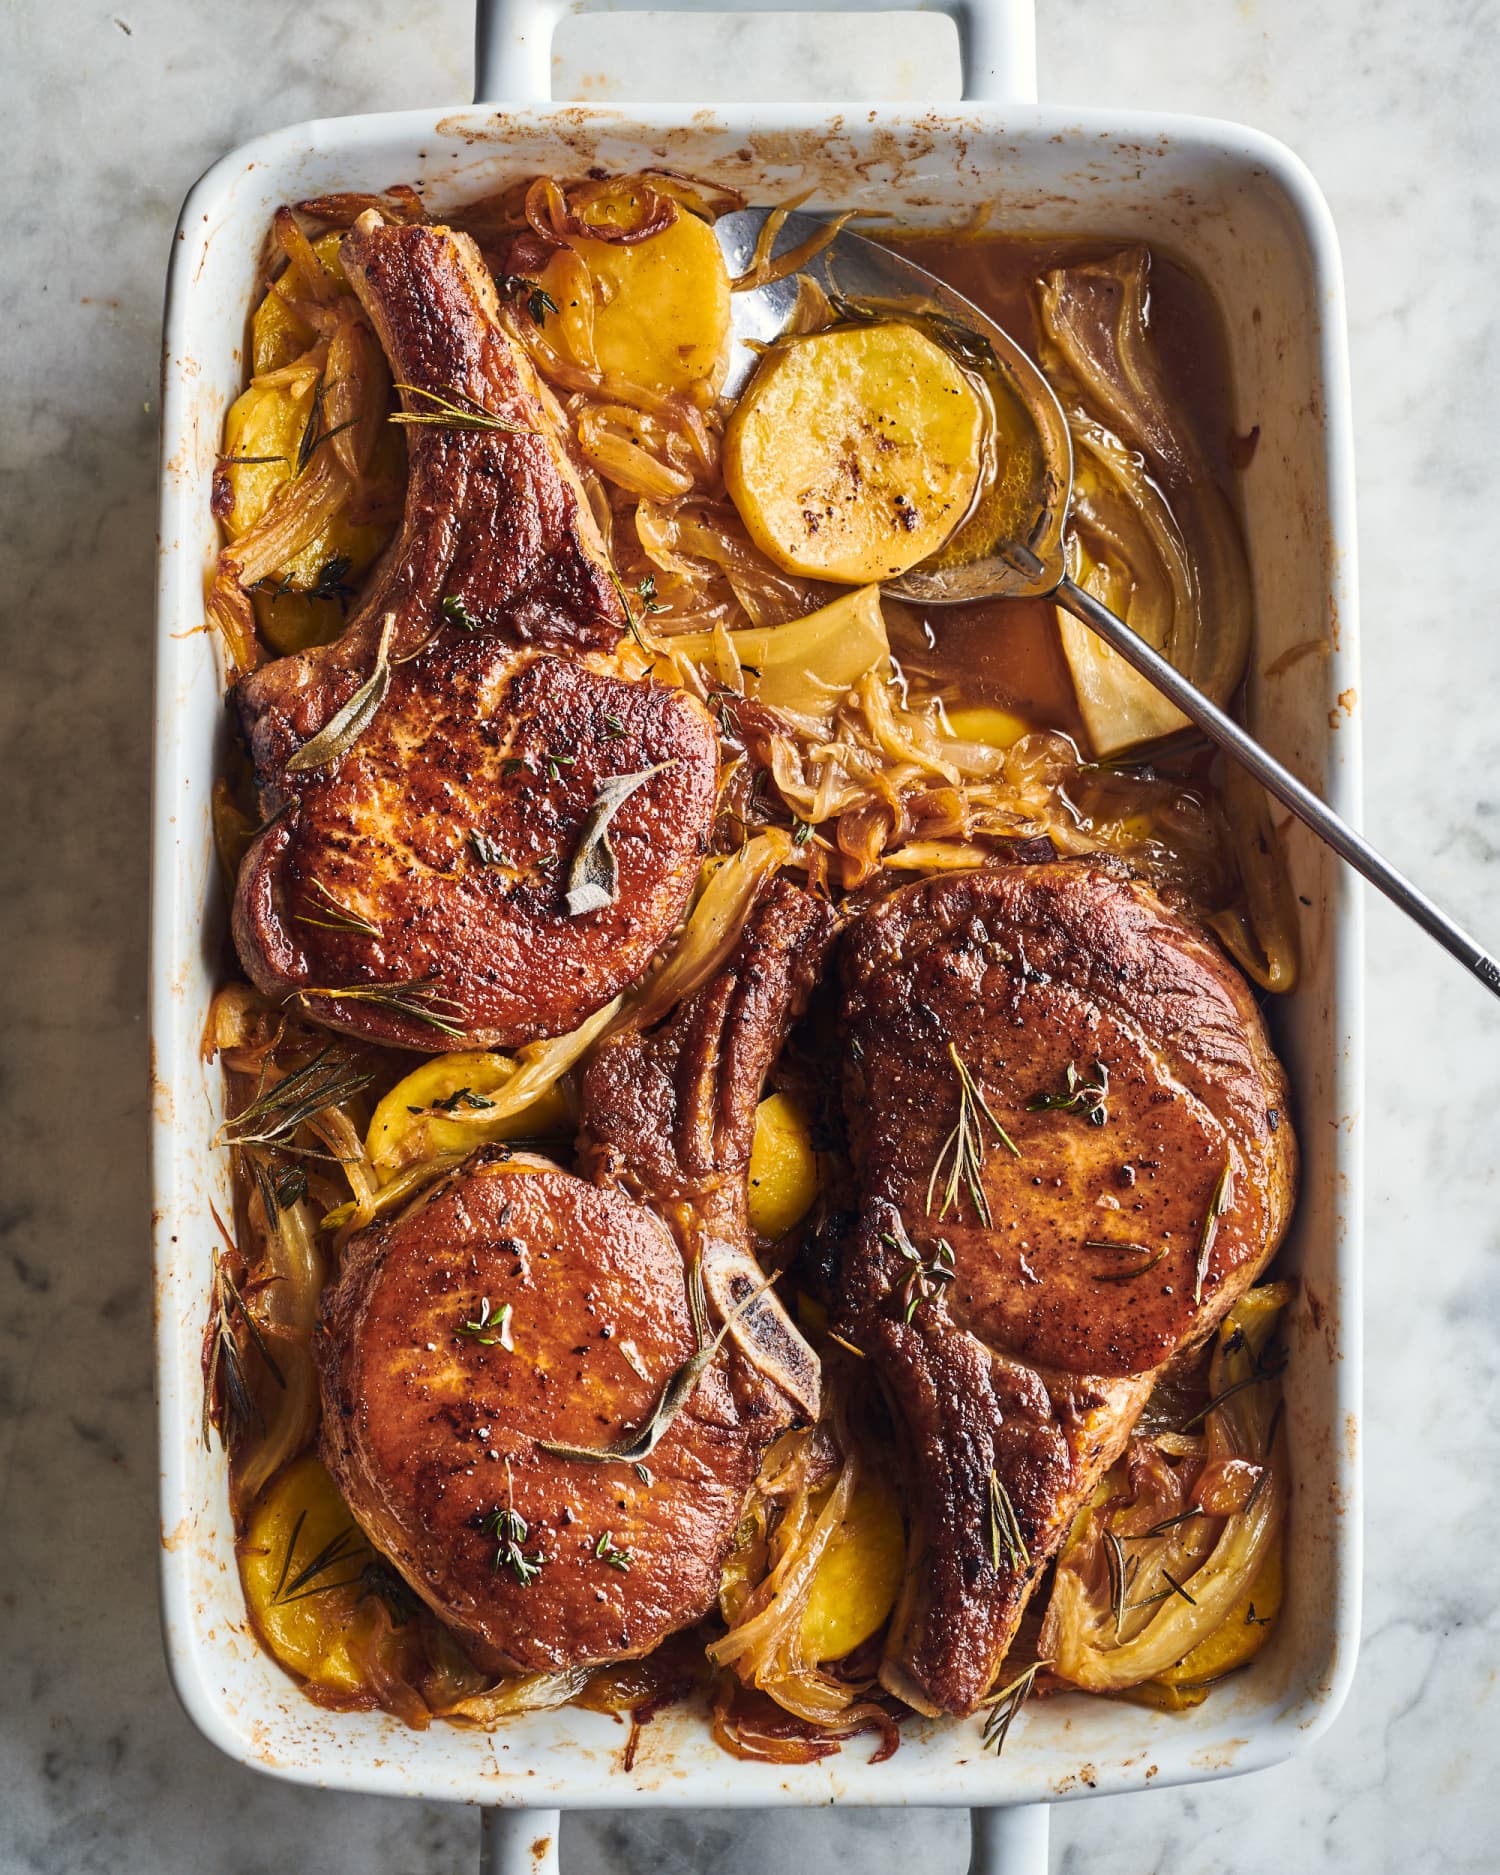 Italian-Inspired Baked Pork Chops with Potatoes